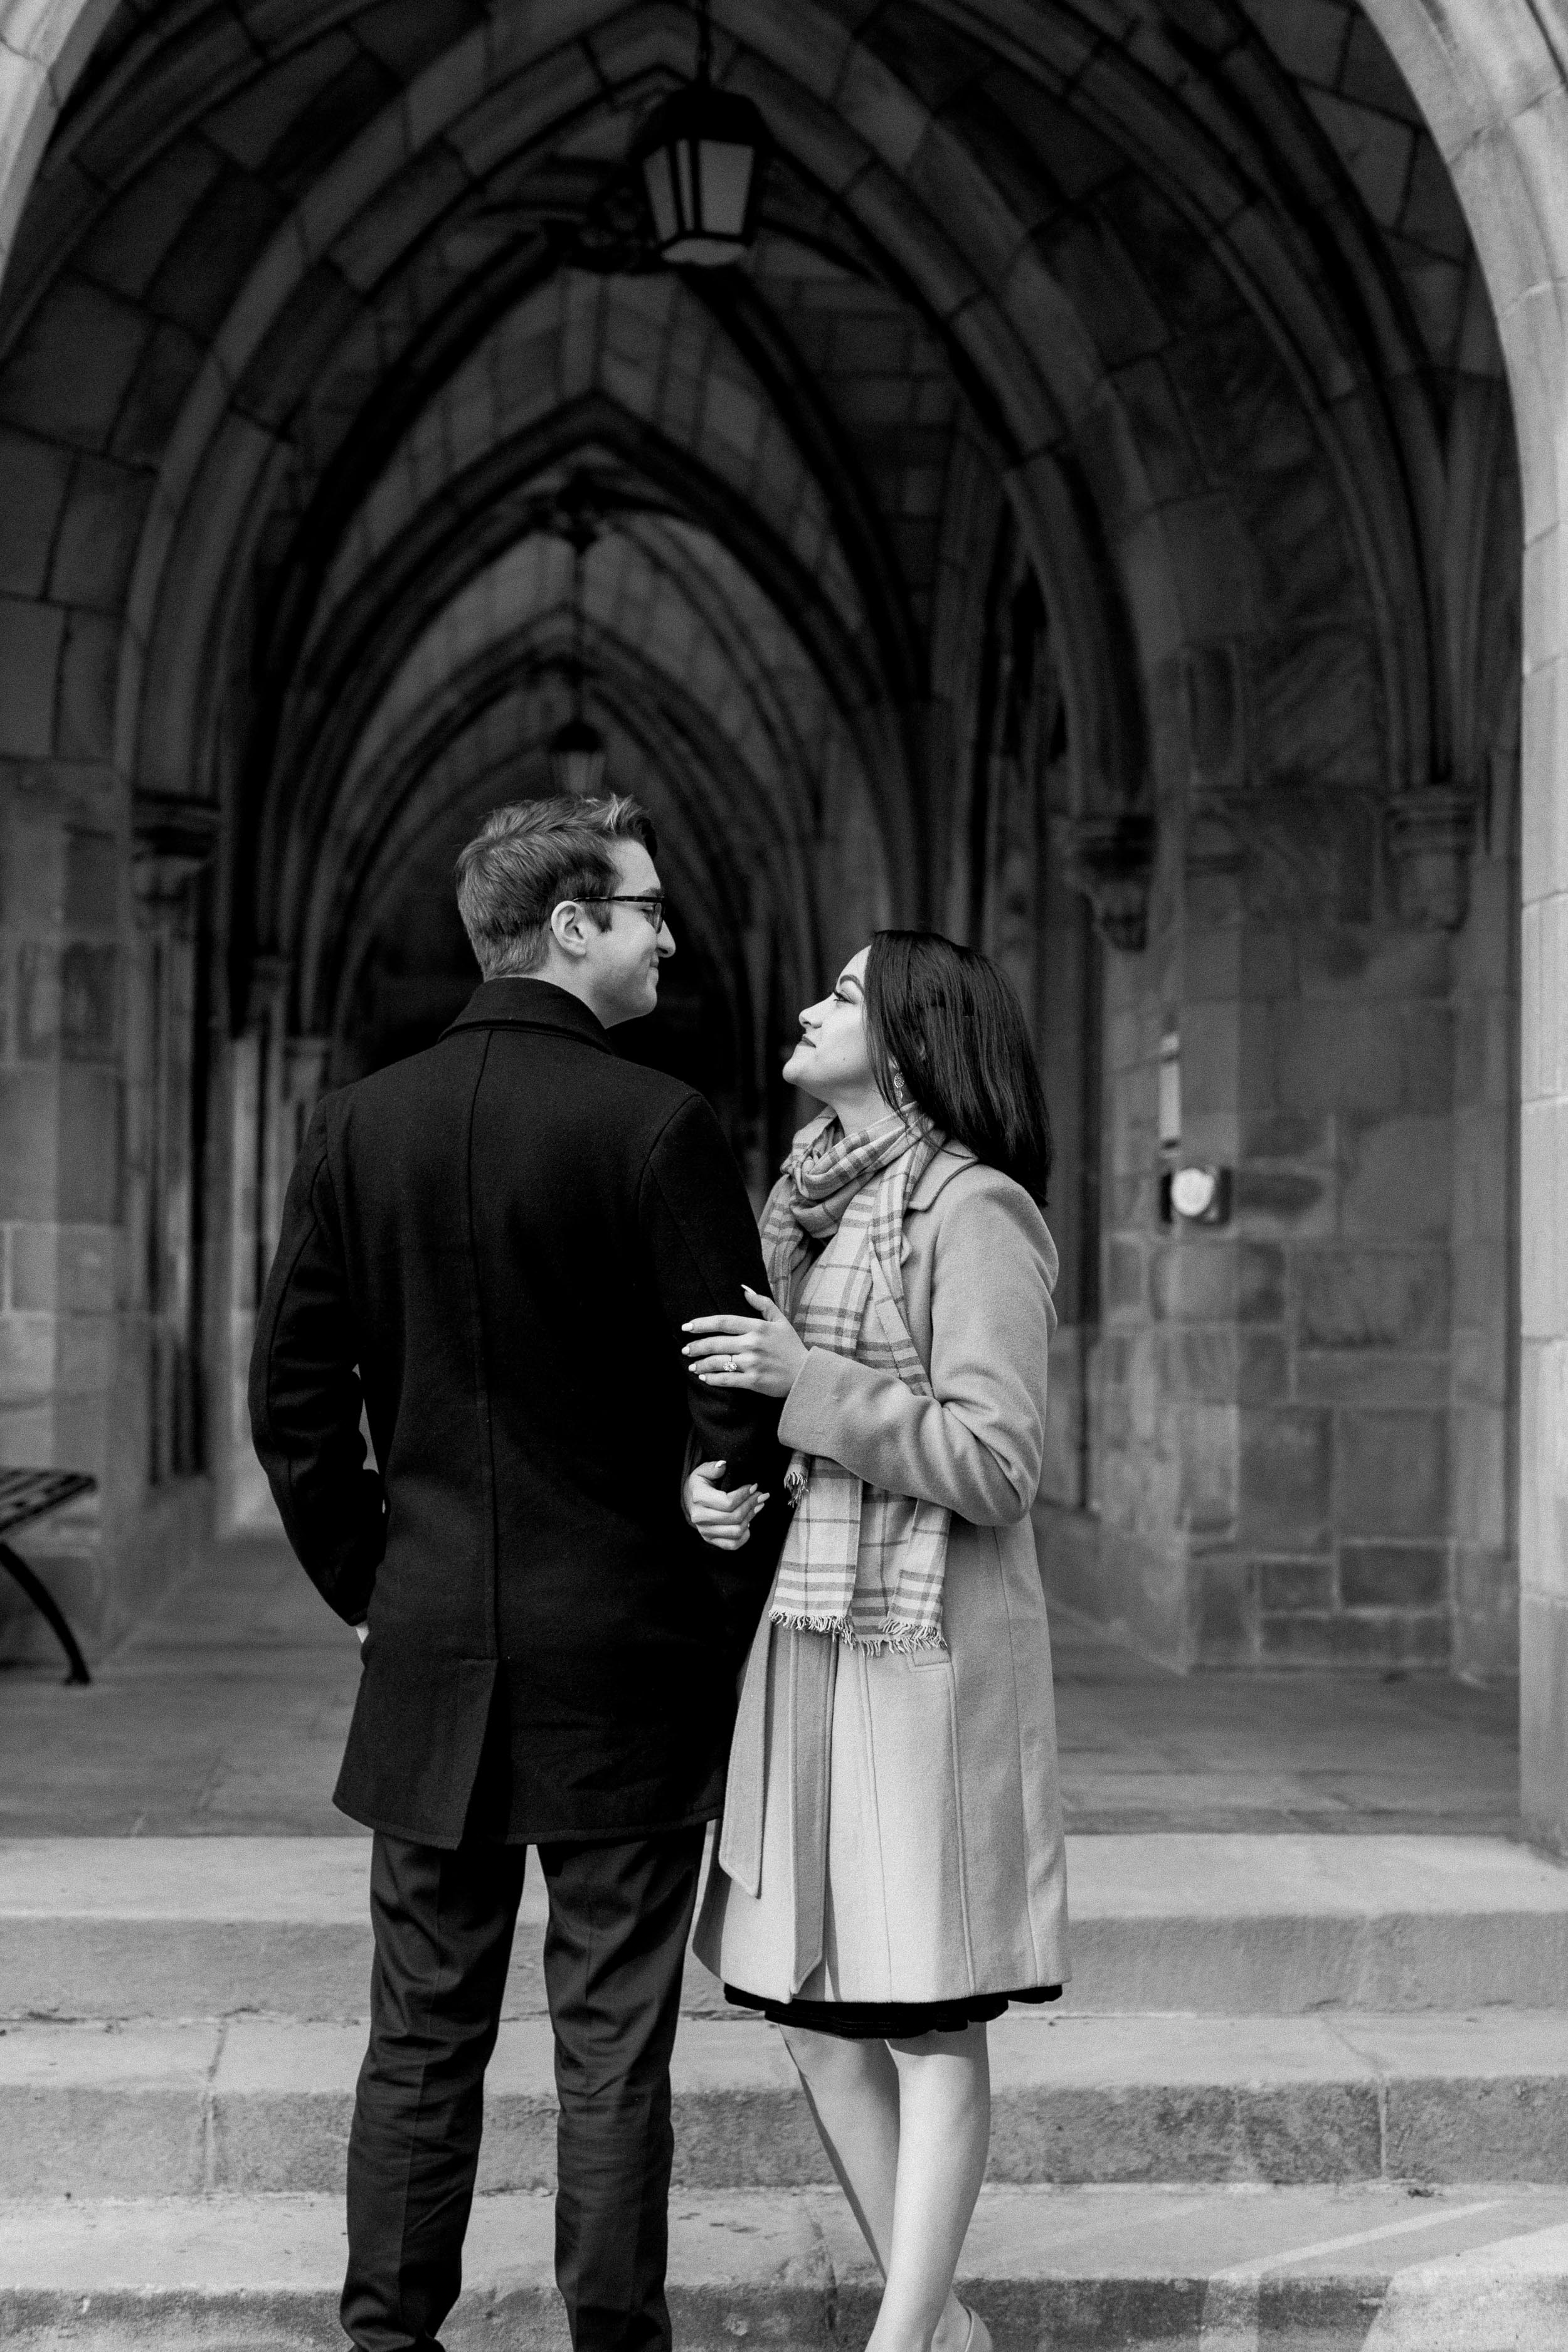 Black and white classic photos at University of Chicago campus engagement session | Chicago engagement photographer | Chicago engagement photo locations | Winter engagement in Chicago | Where to take Chicago engagement photos | Chicago skyline engagement